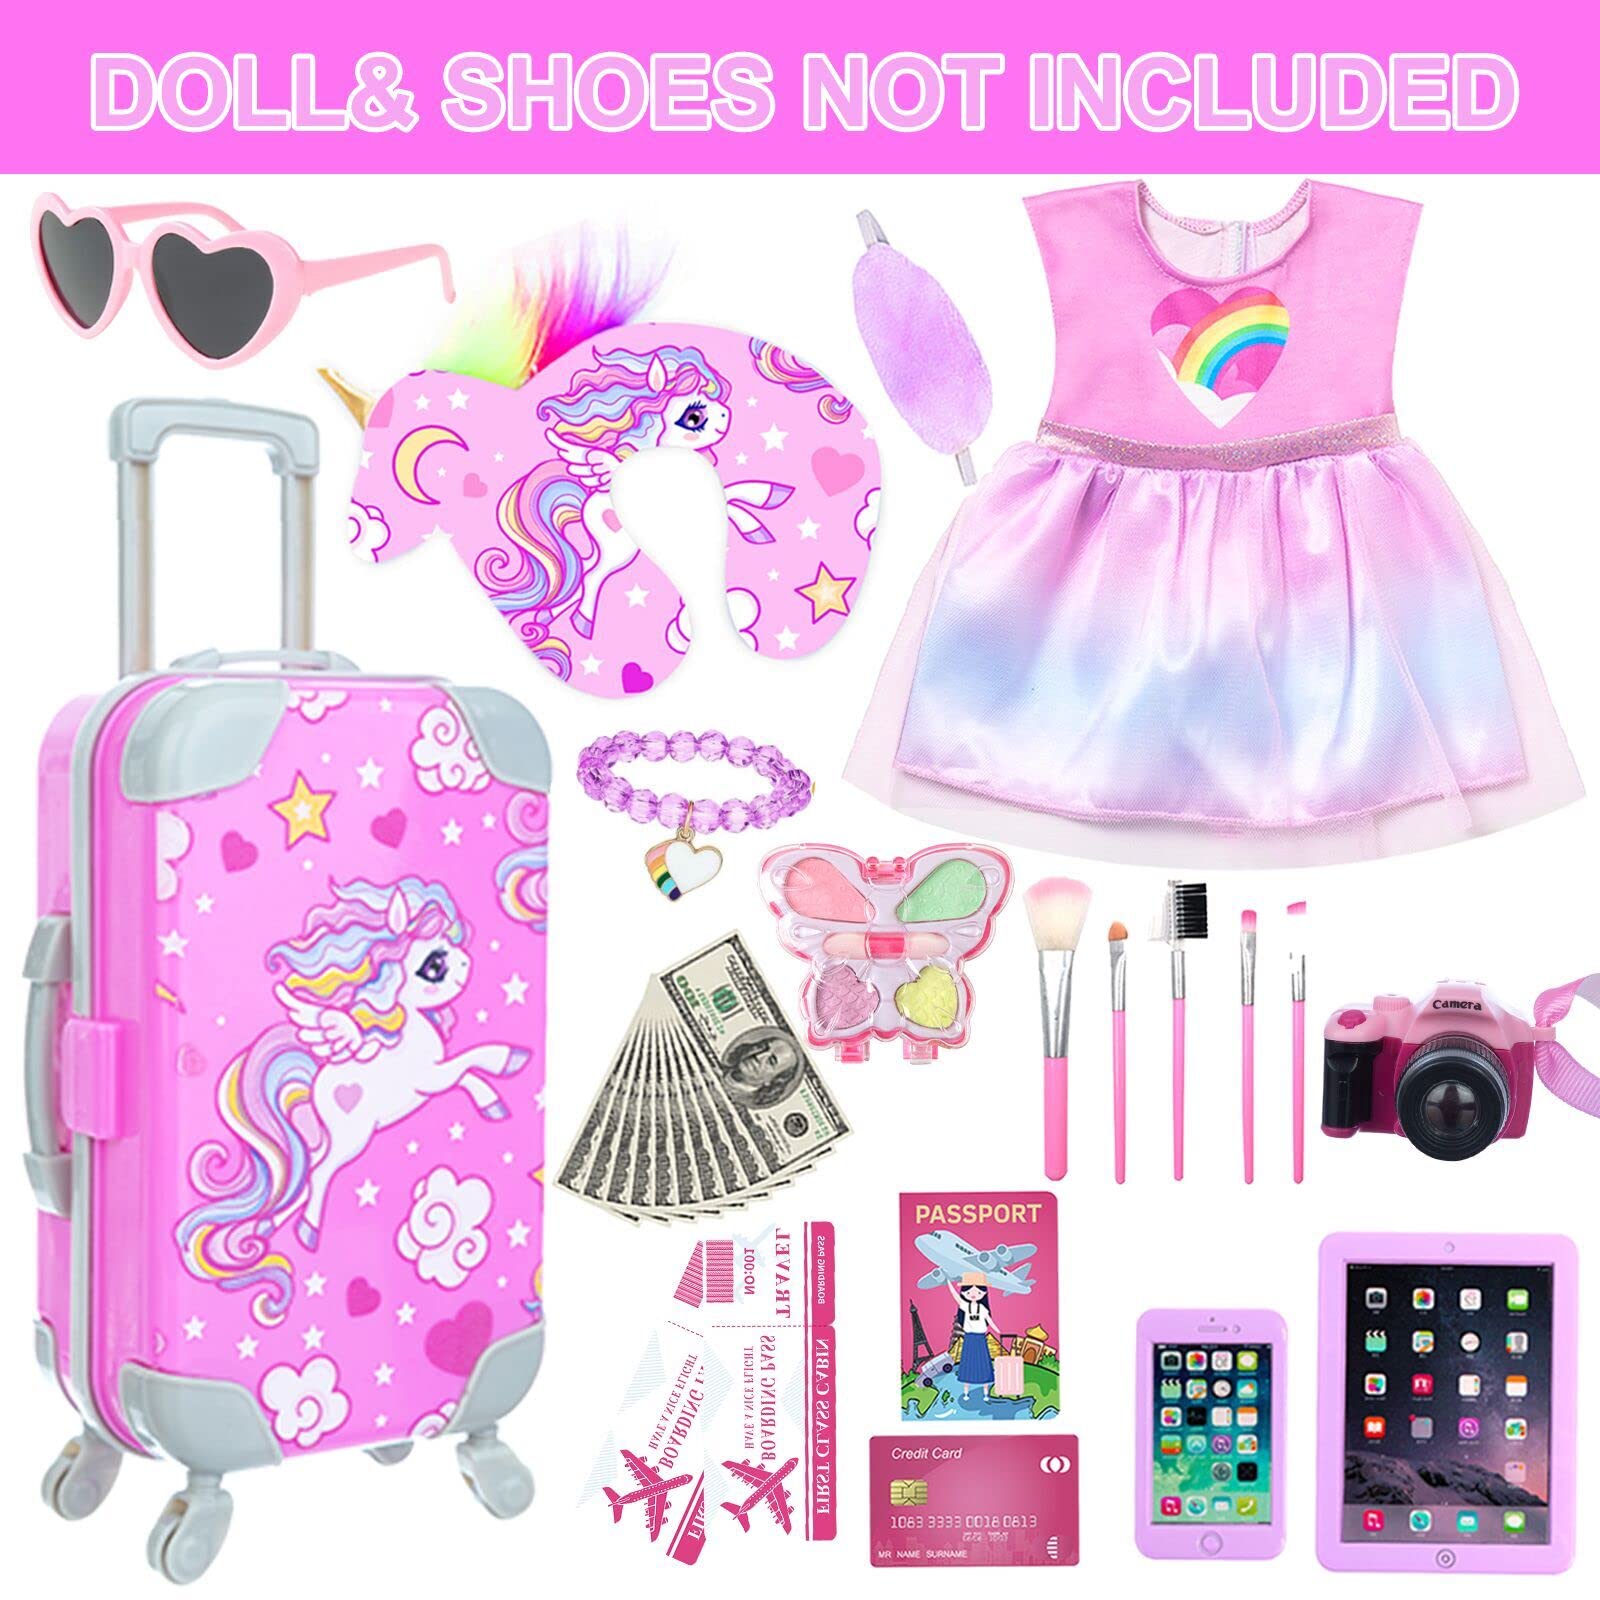 DOTVOSY 29 Pcs American 18 Inch Doll Clothes and Accessories Travel Suitcase Set Designed for 18